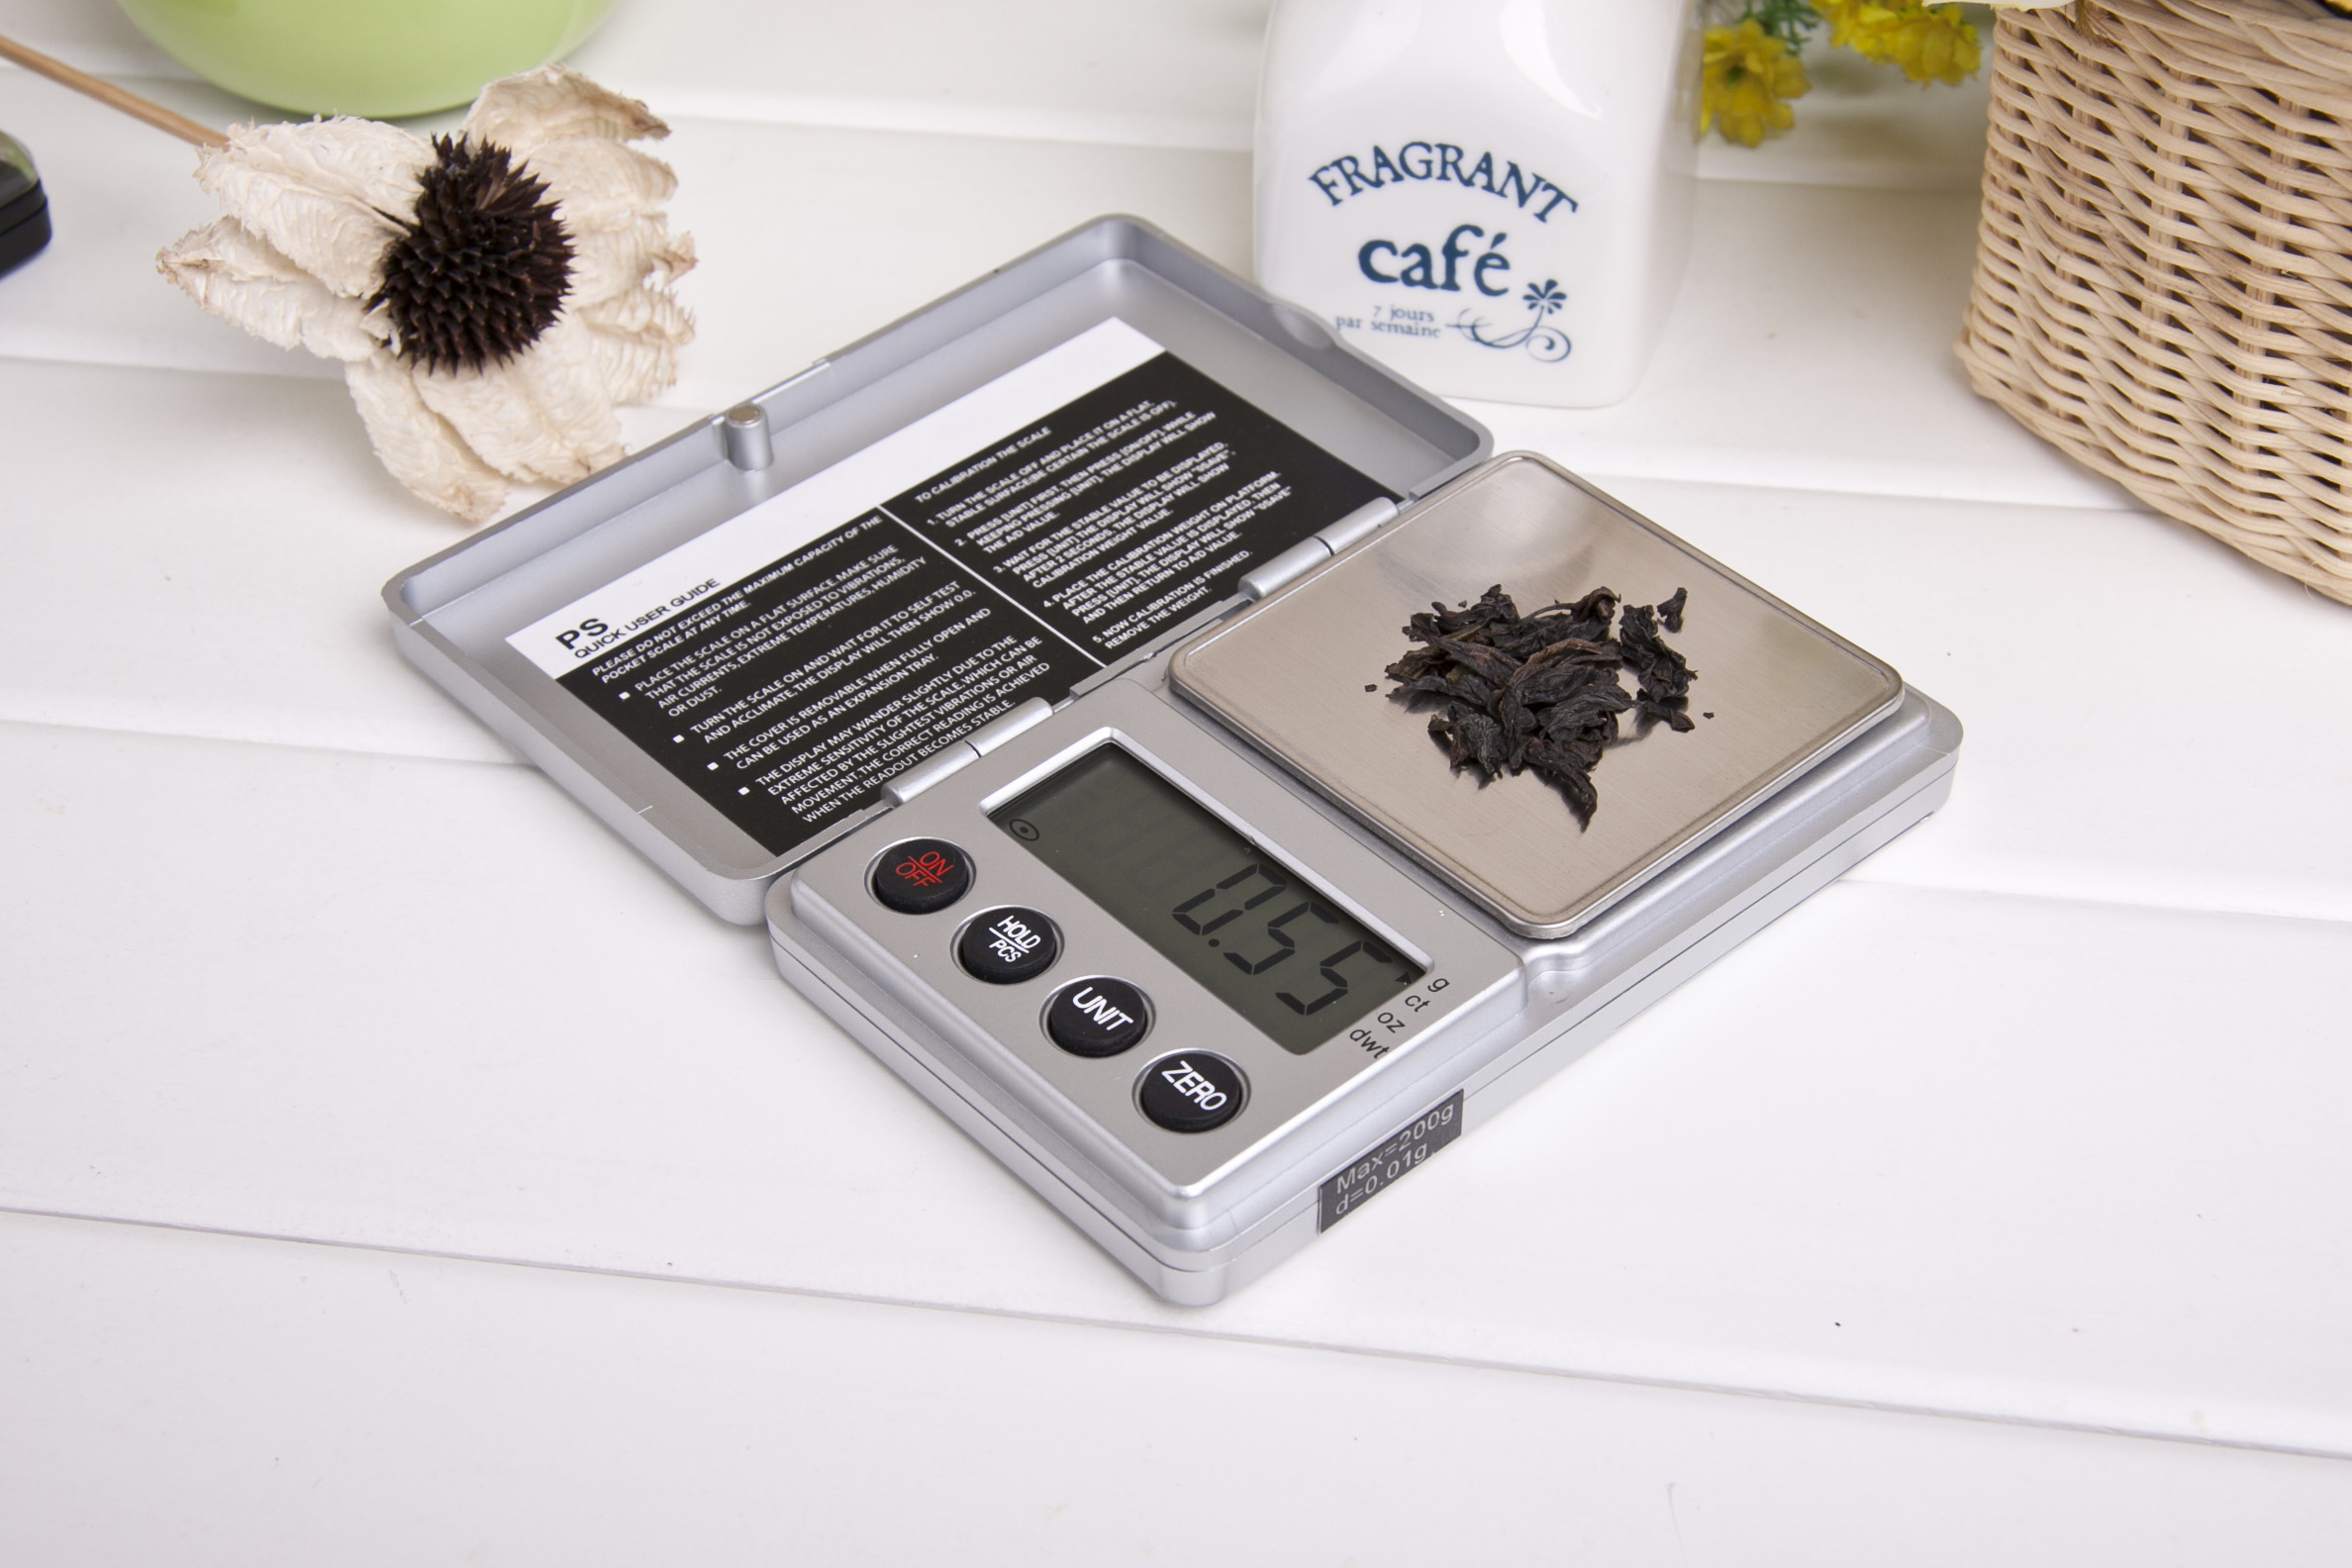 PS jewelry gram scale pocket weighing scale 